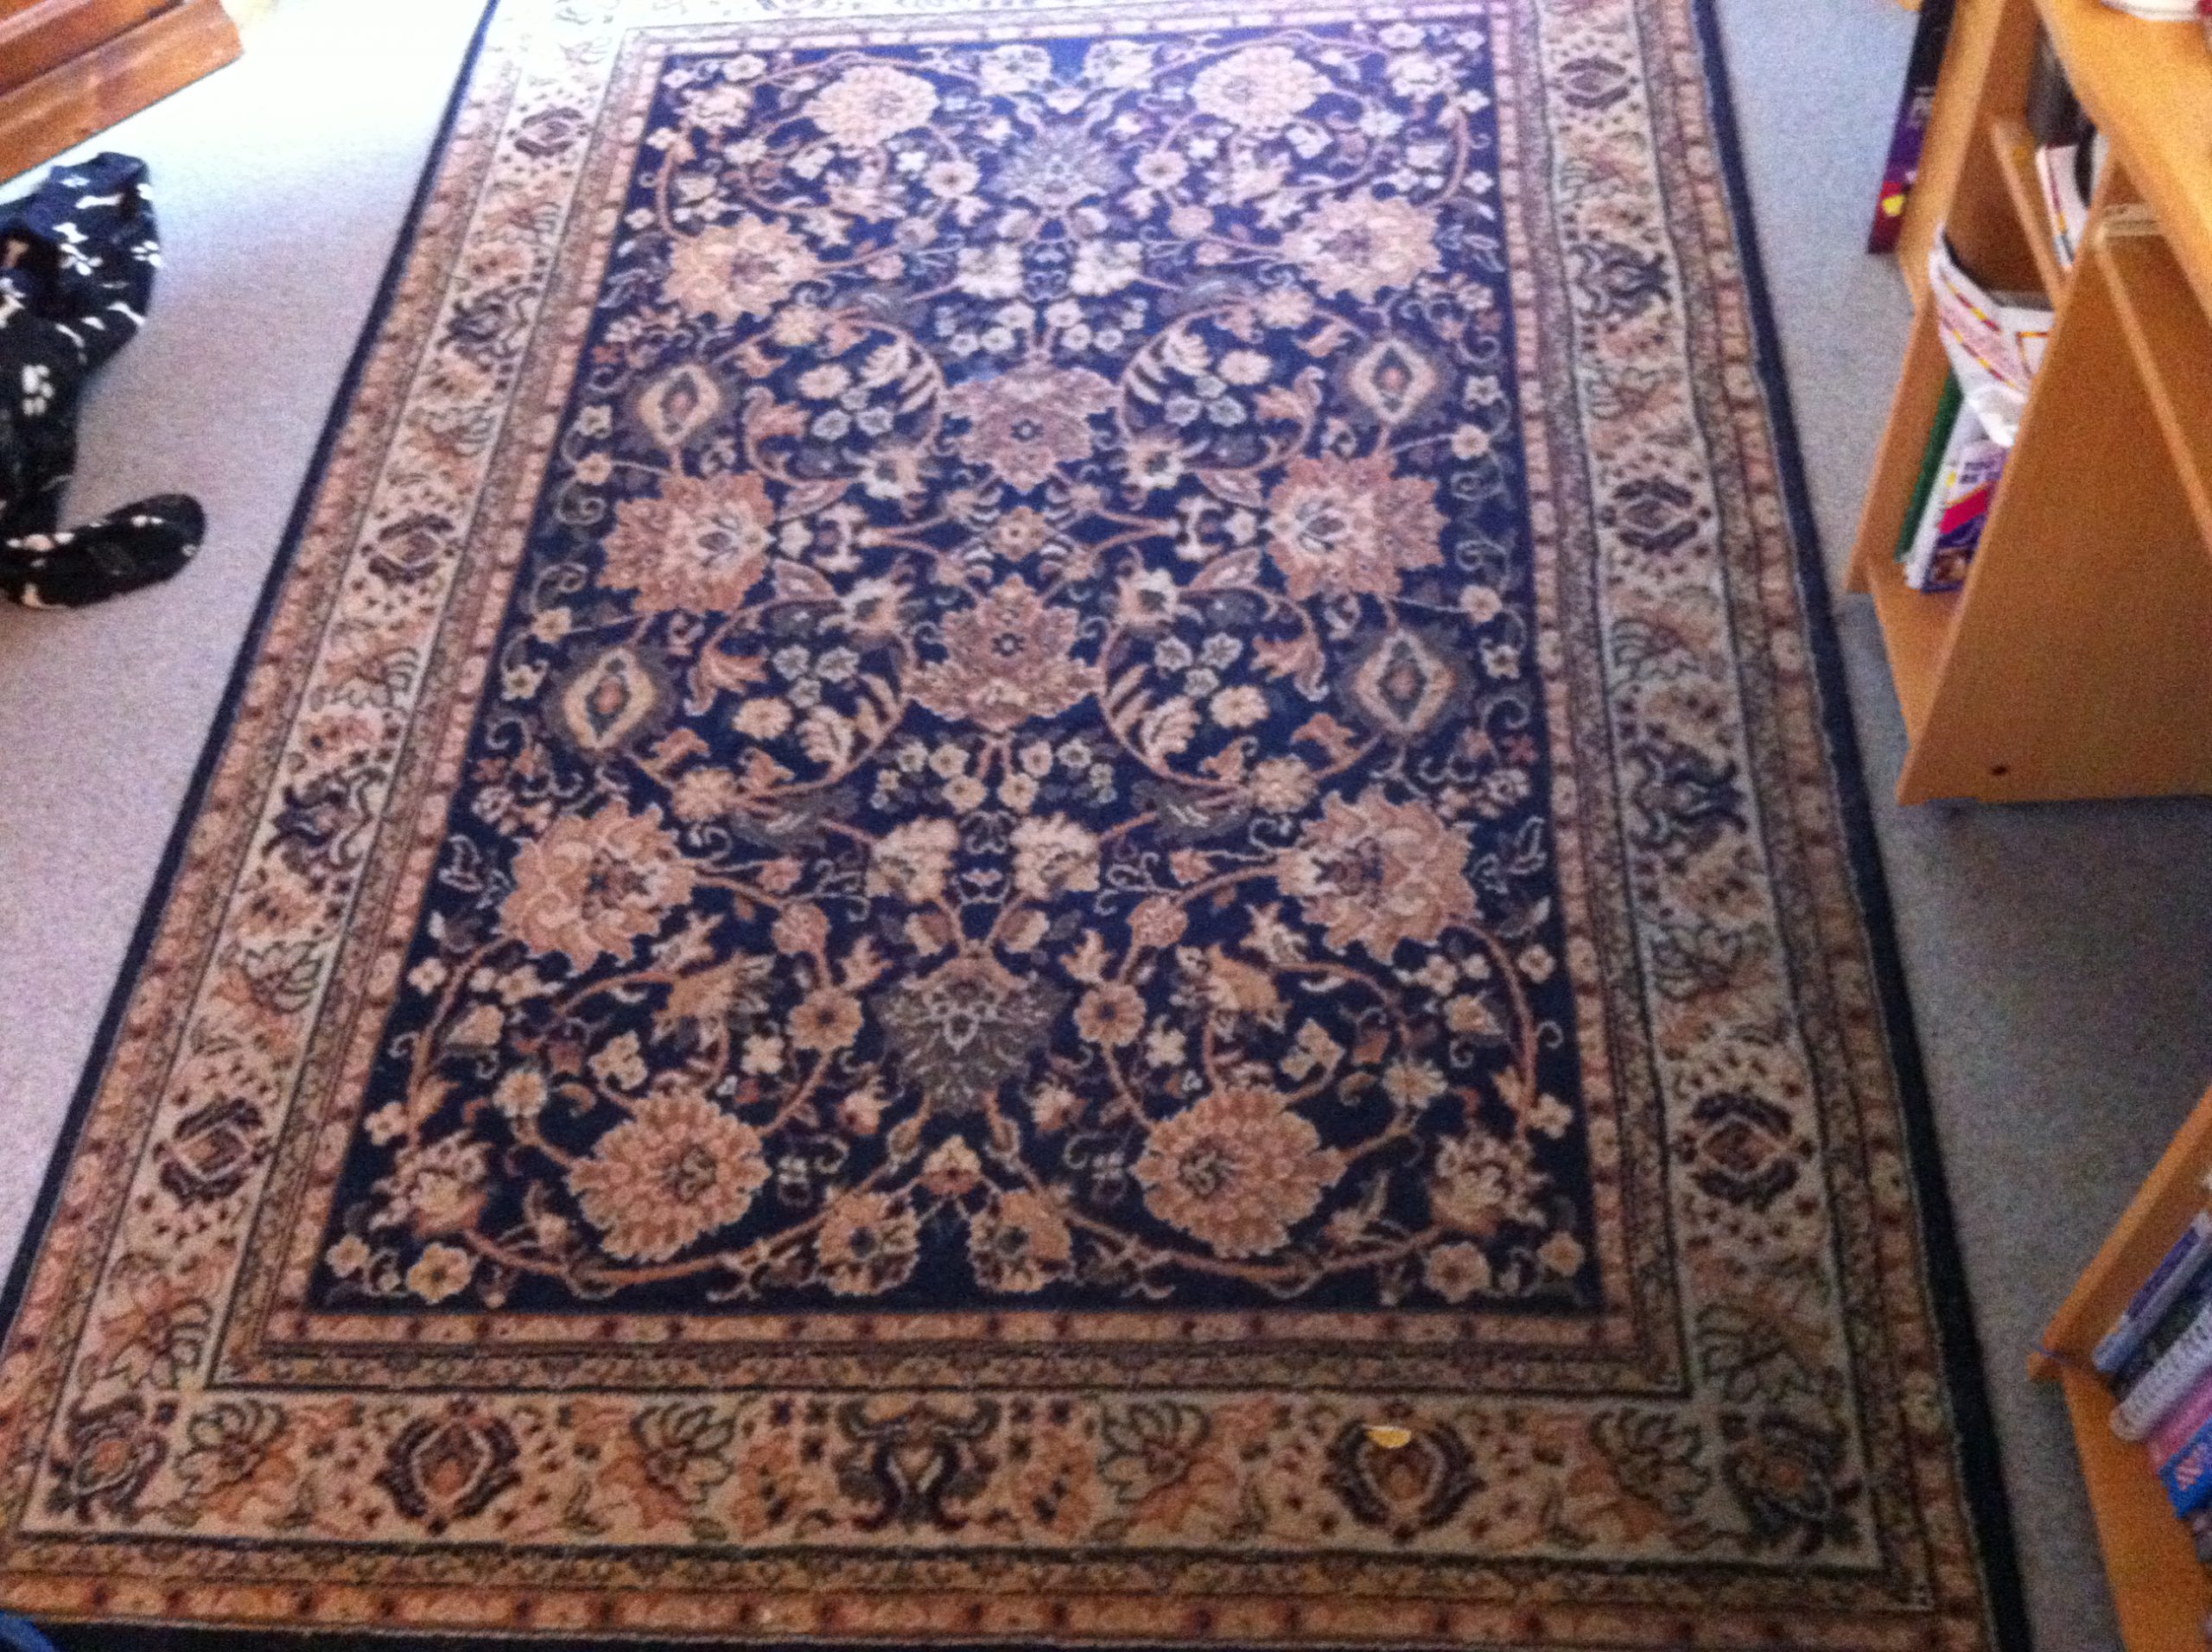 Stain Rug Before Being Cleaned by Priceless Carpet Cleaning